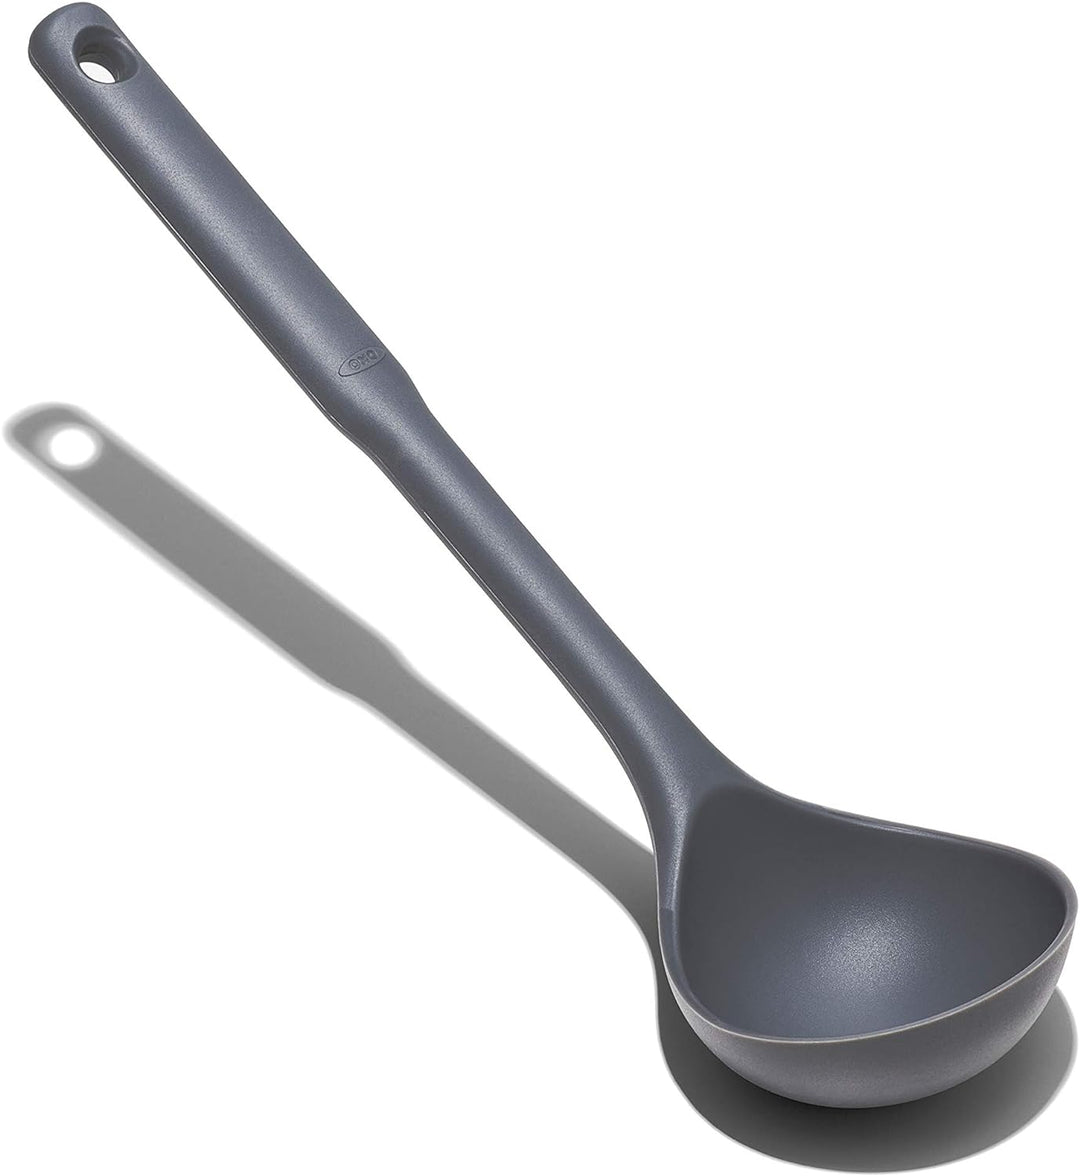 Soup Ladle by OXO